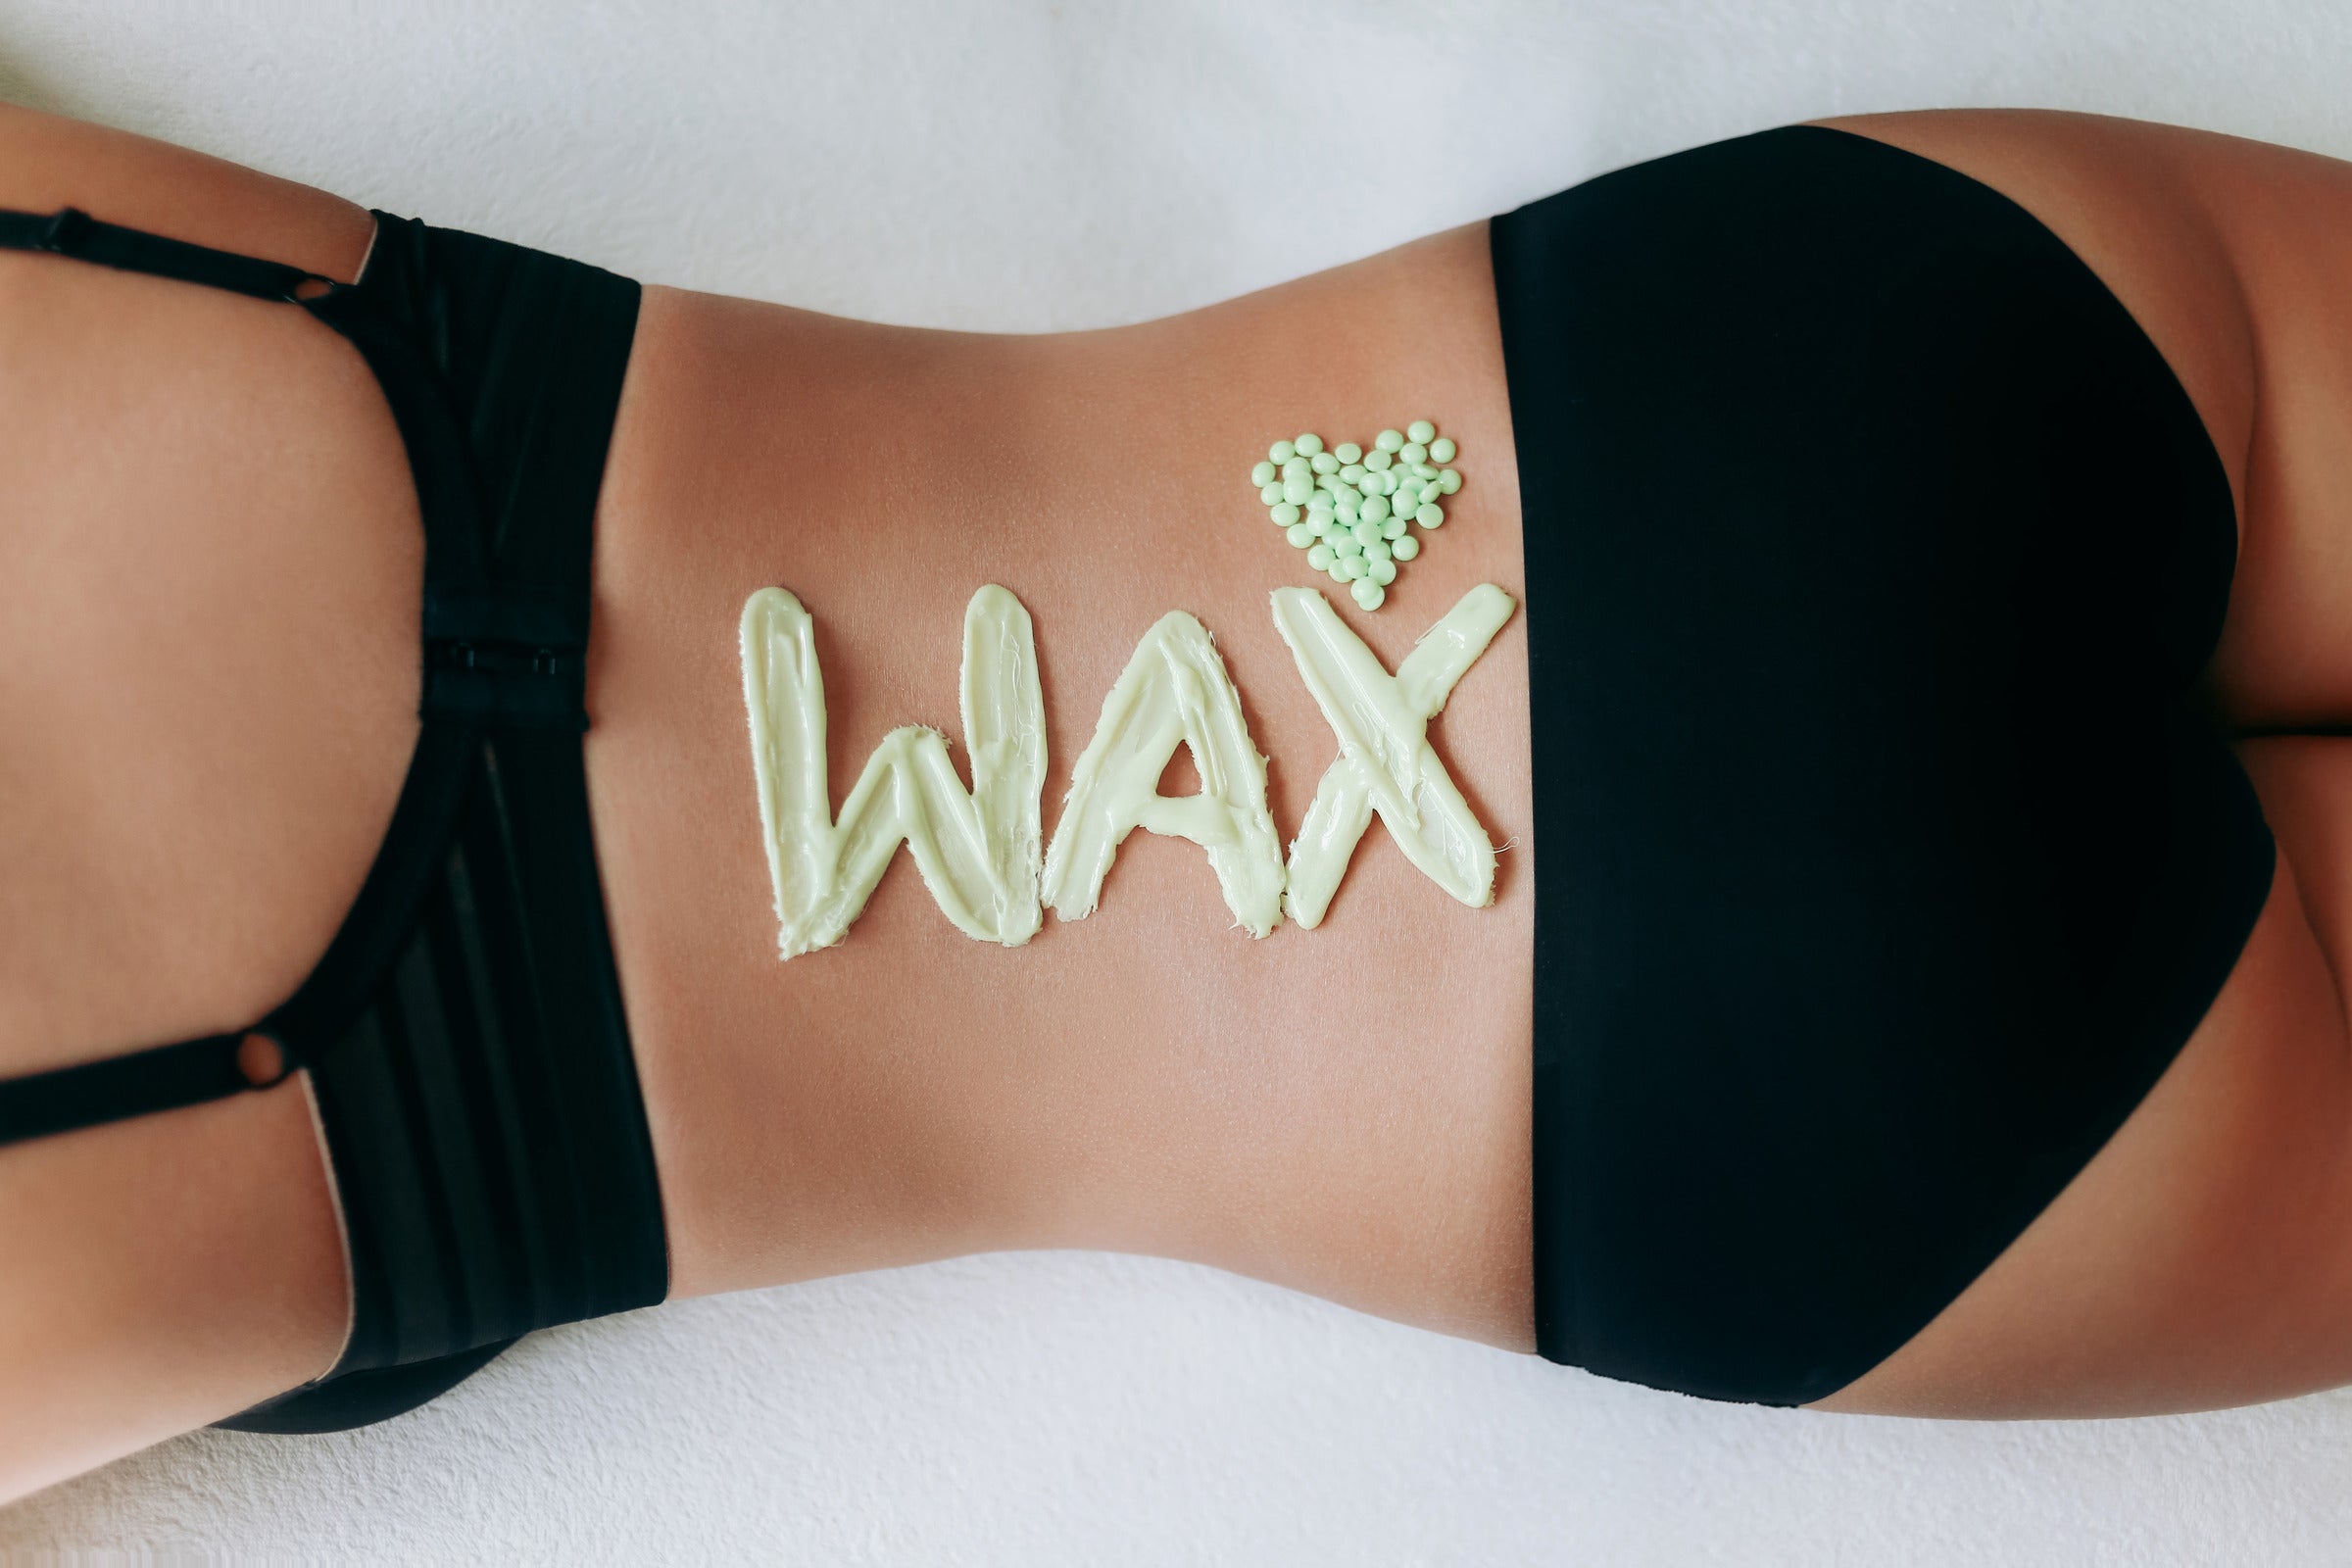 Brazilian Waxing at Home Aftercare and Cleaning Tips and Avoiding Irritation